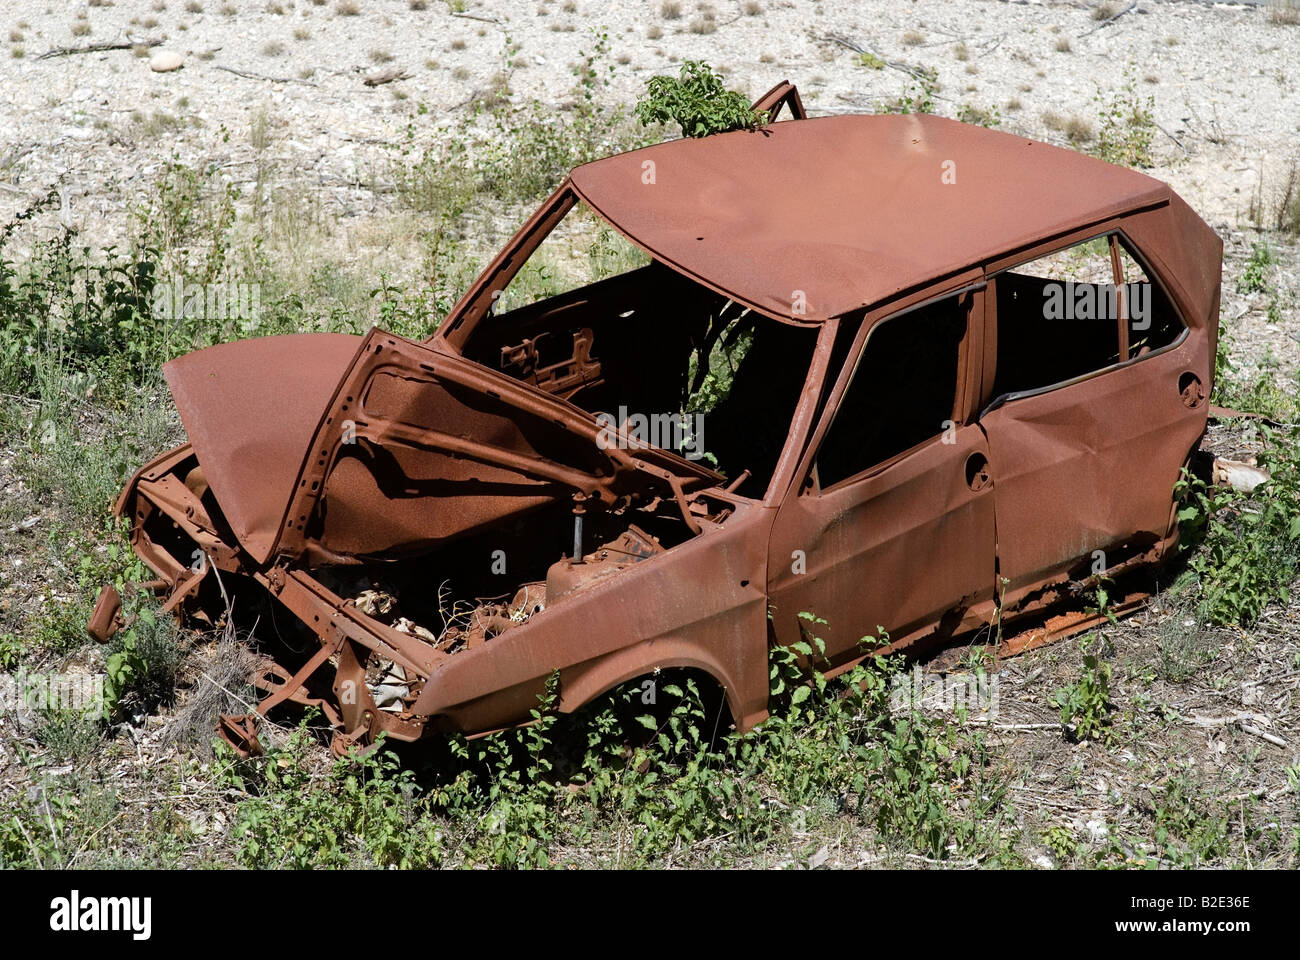 France Vaucluse terminally rusty rusted rusts car small russet rust brown rust brown junk at roadside Stock Photo